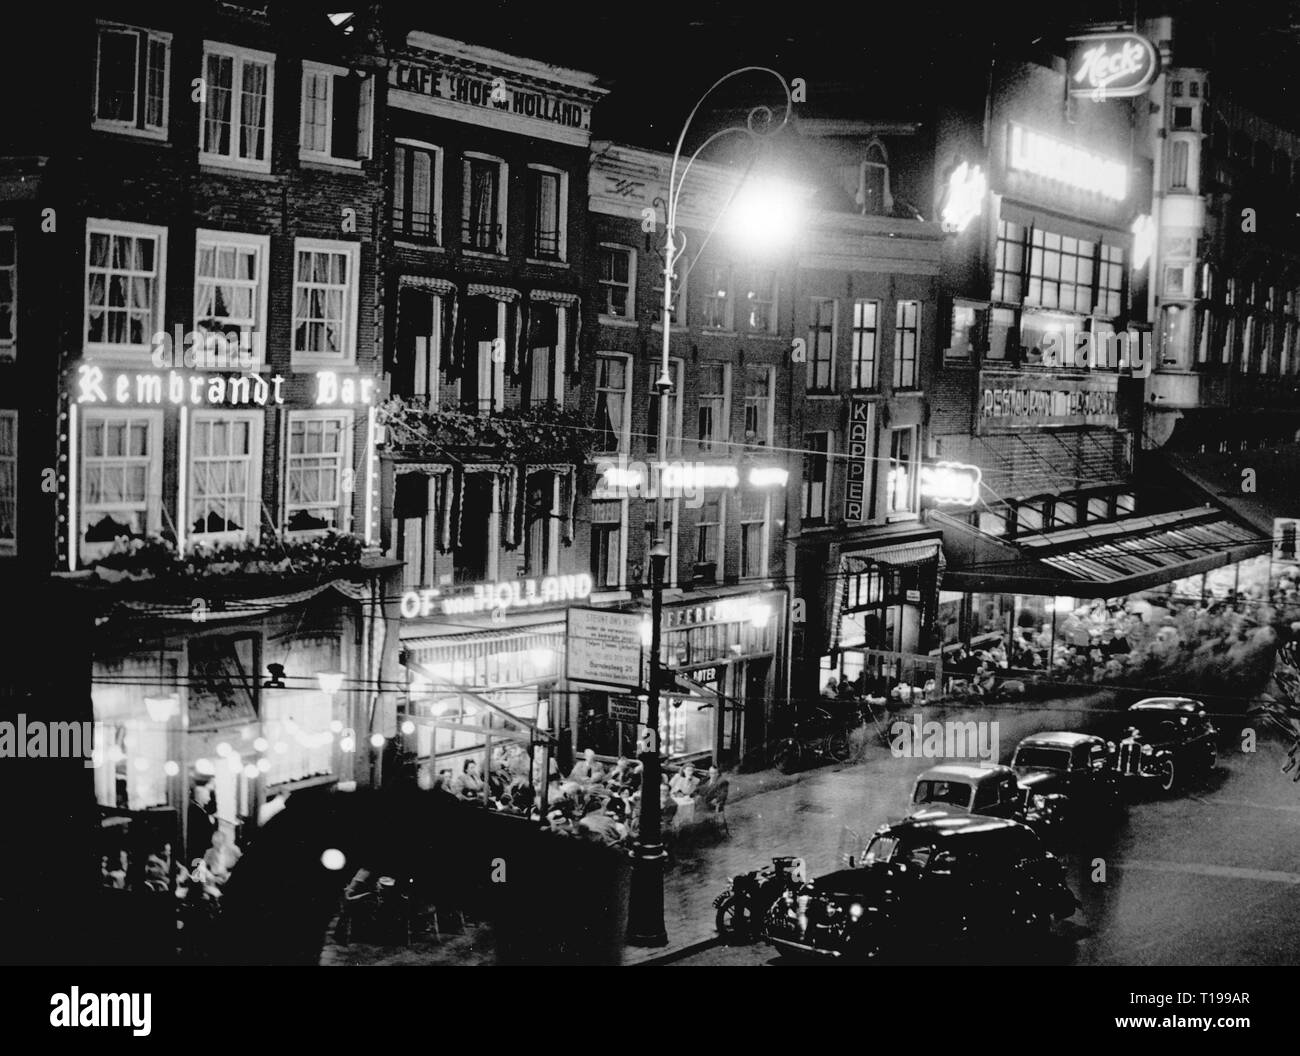 geography / travel, Netherlands, Amsterdam, square, Rembrandtplein, at night, 1950s, night shot, nights, building, buildings, facade, facades, gastronomy, cafe, cafes, street lamp, street-lamp, street light, street lamps, street-lamps, street lights, lantern, lamp, lanterns, lamps, luminous advertising, neon sign, neon signs, street, streets, car, cars, Holland, Benelux, Benelux country, Benelux state, Benelux countries, Benelux states, Western Europe, Europe, architecture, bar, bars, pub, pubs, tavern, taverns, square, squares, at night, by nigh, Additional-Rights-Clearance-Info-Not-Available Stock Photo